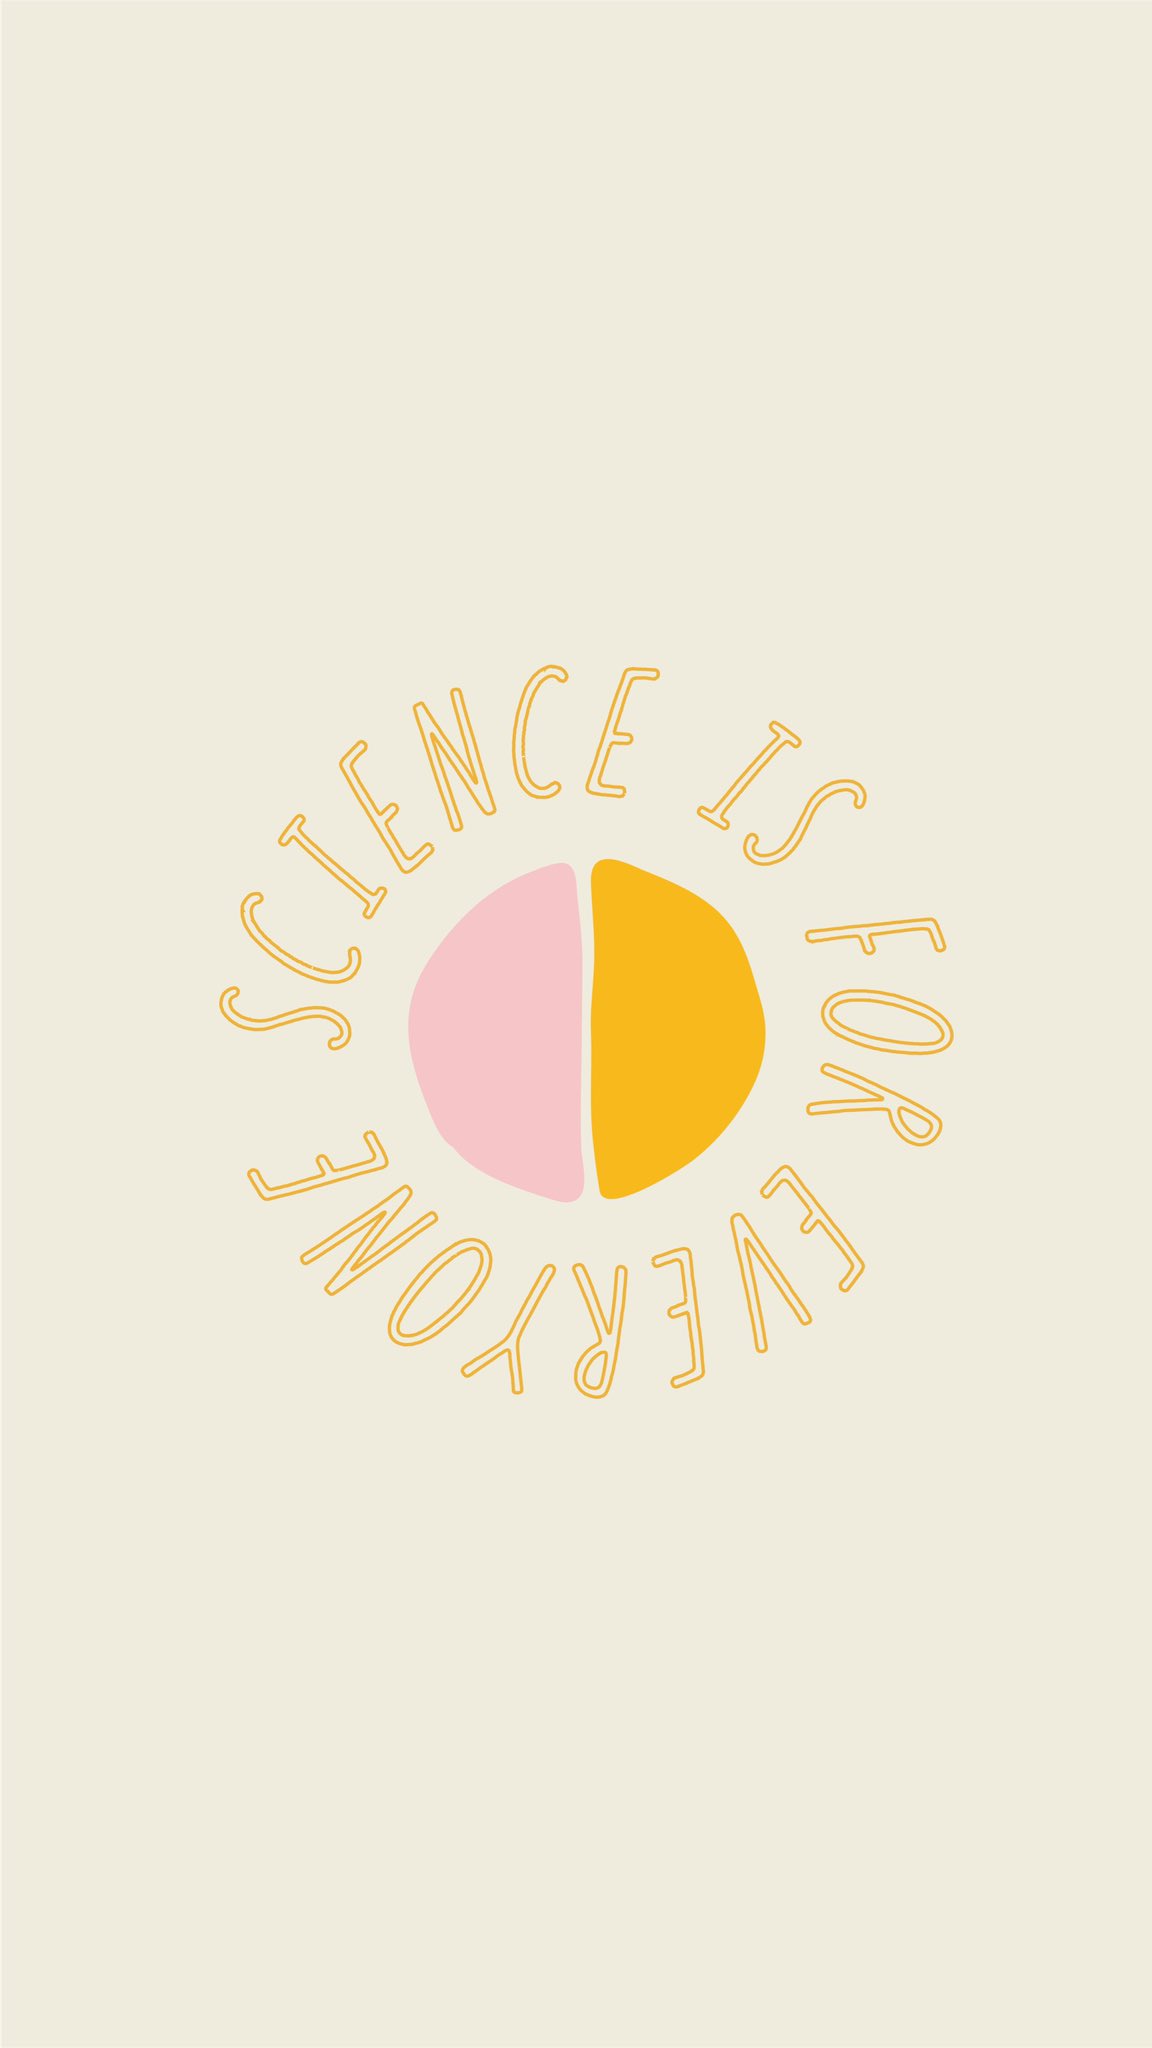 Little Science Co på Twitter: A little reminder in case you need it. Science is for everyone. Whether it feels like it to you right now, everyone can and should contribute to